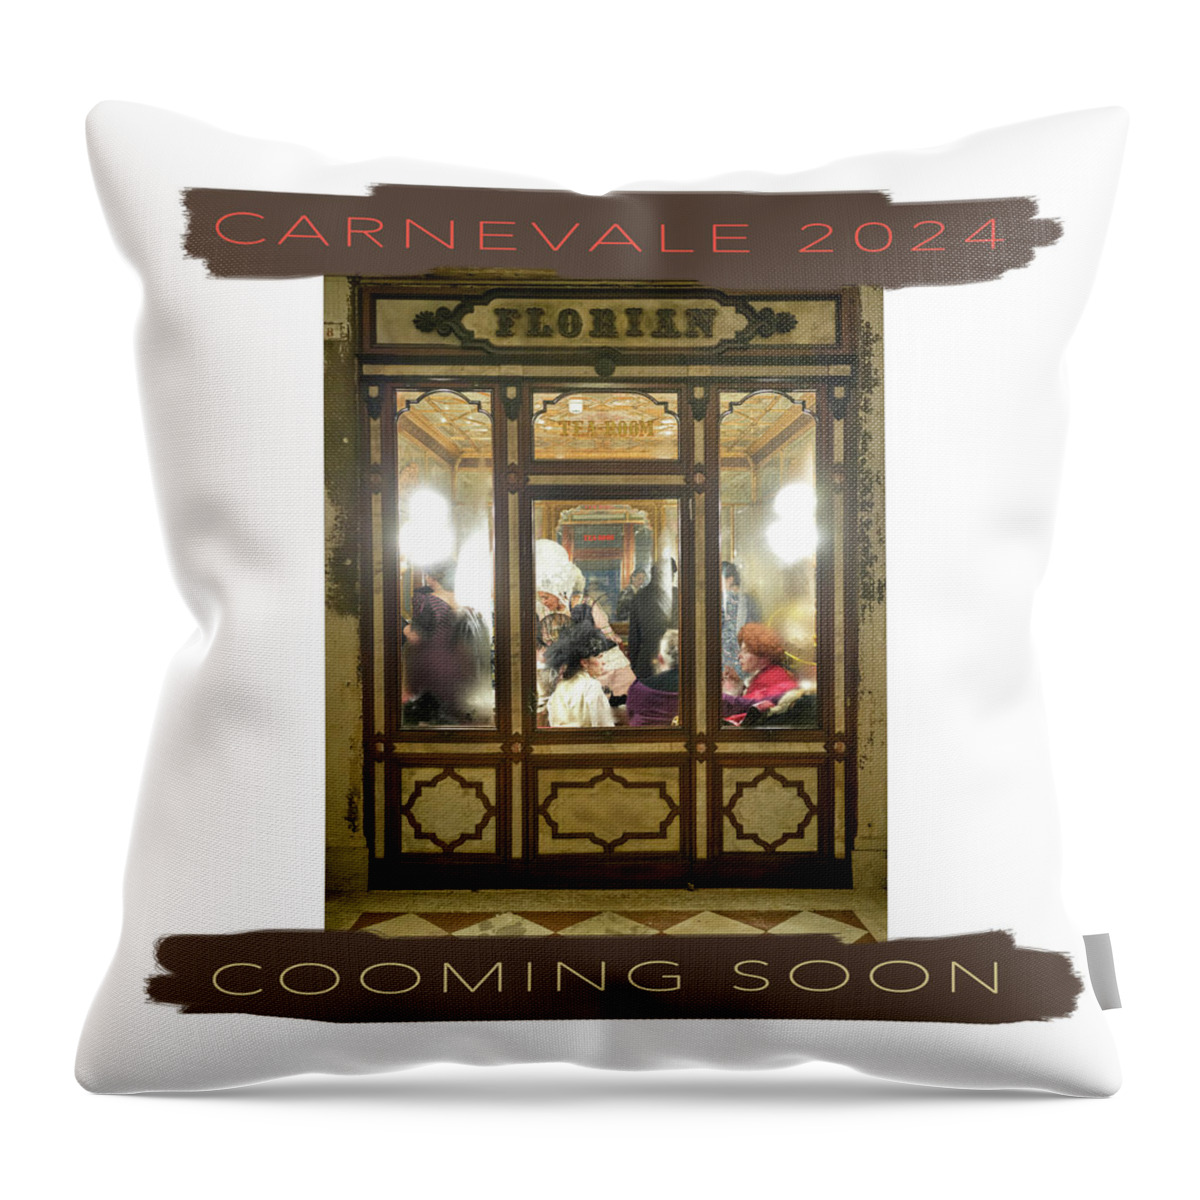 Carnevale2024 Throw Pillow featuring the photograph Cooming Soon by Marco Missiaja